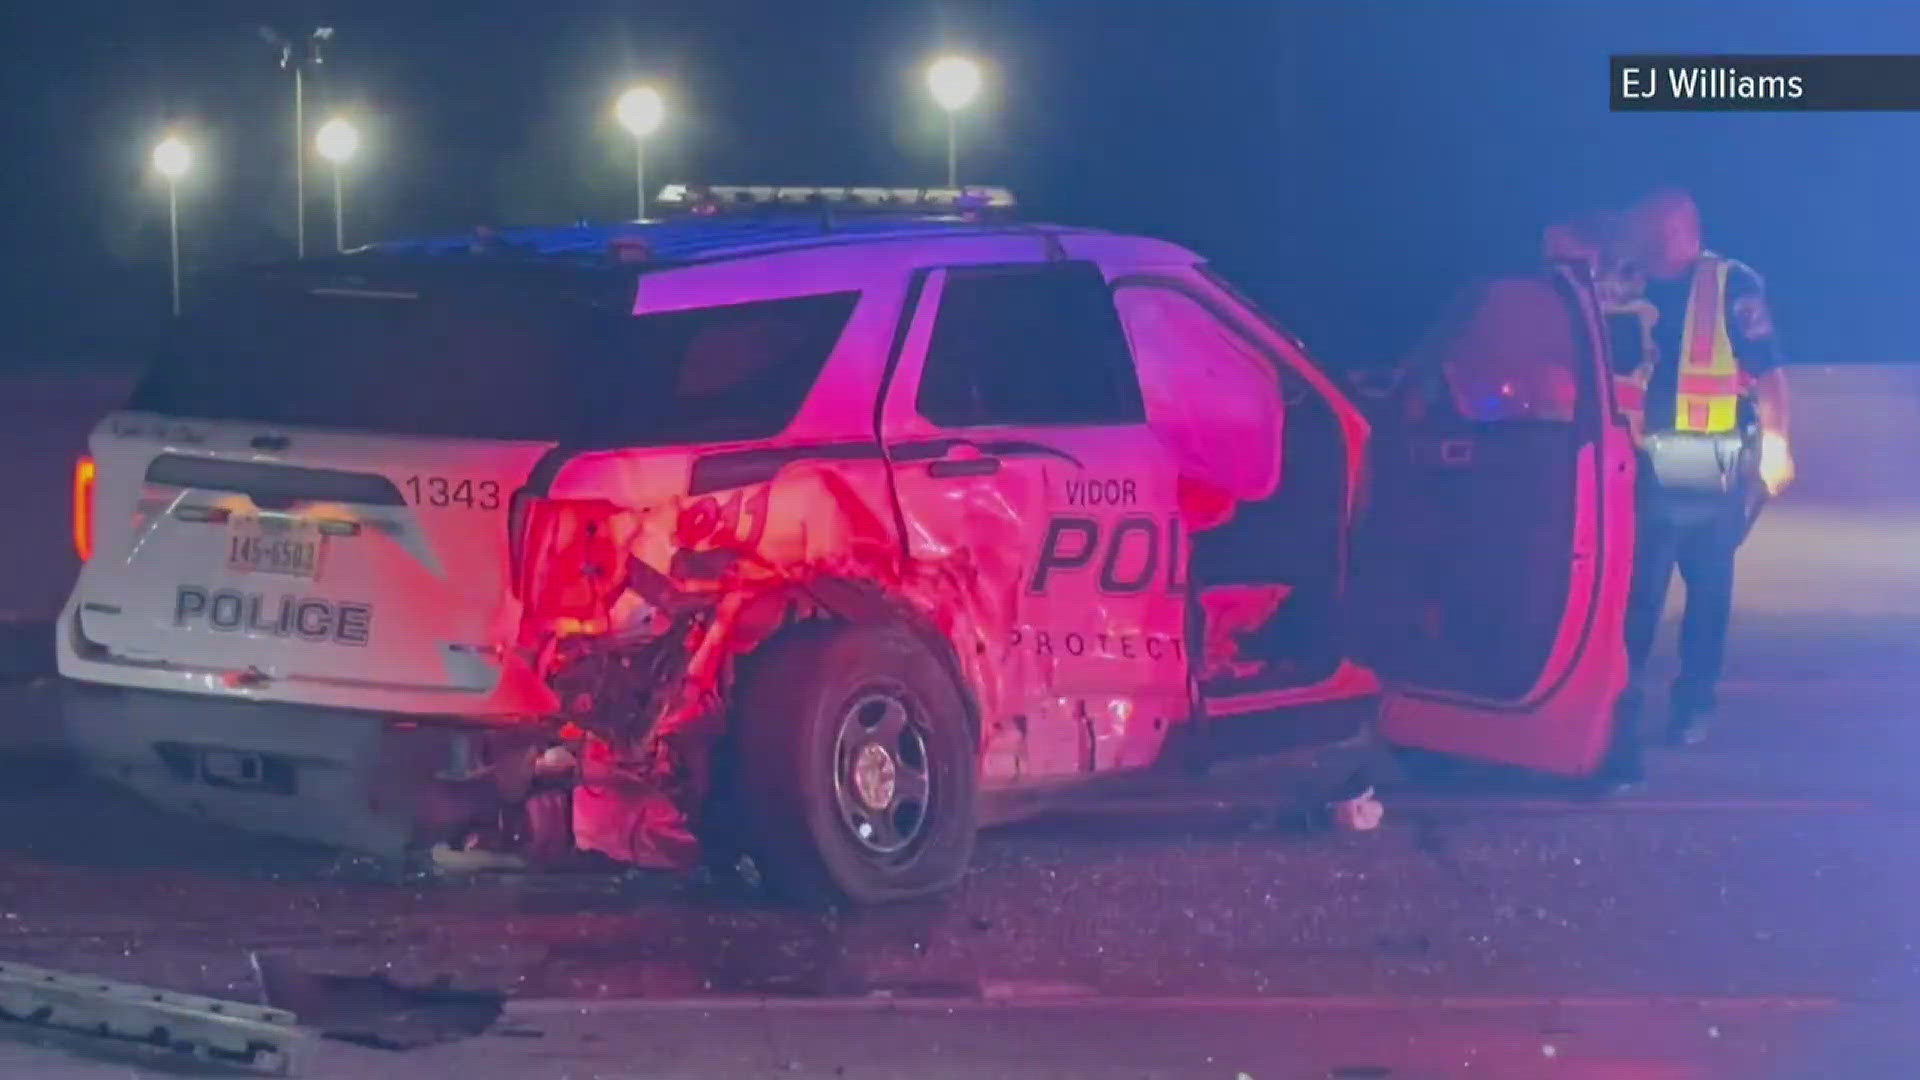 Troopers with the Texas Department of Public Safety are investigating after a Vidor Police car was struck late Monday night at an accident scene along Interstate 10.